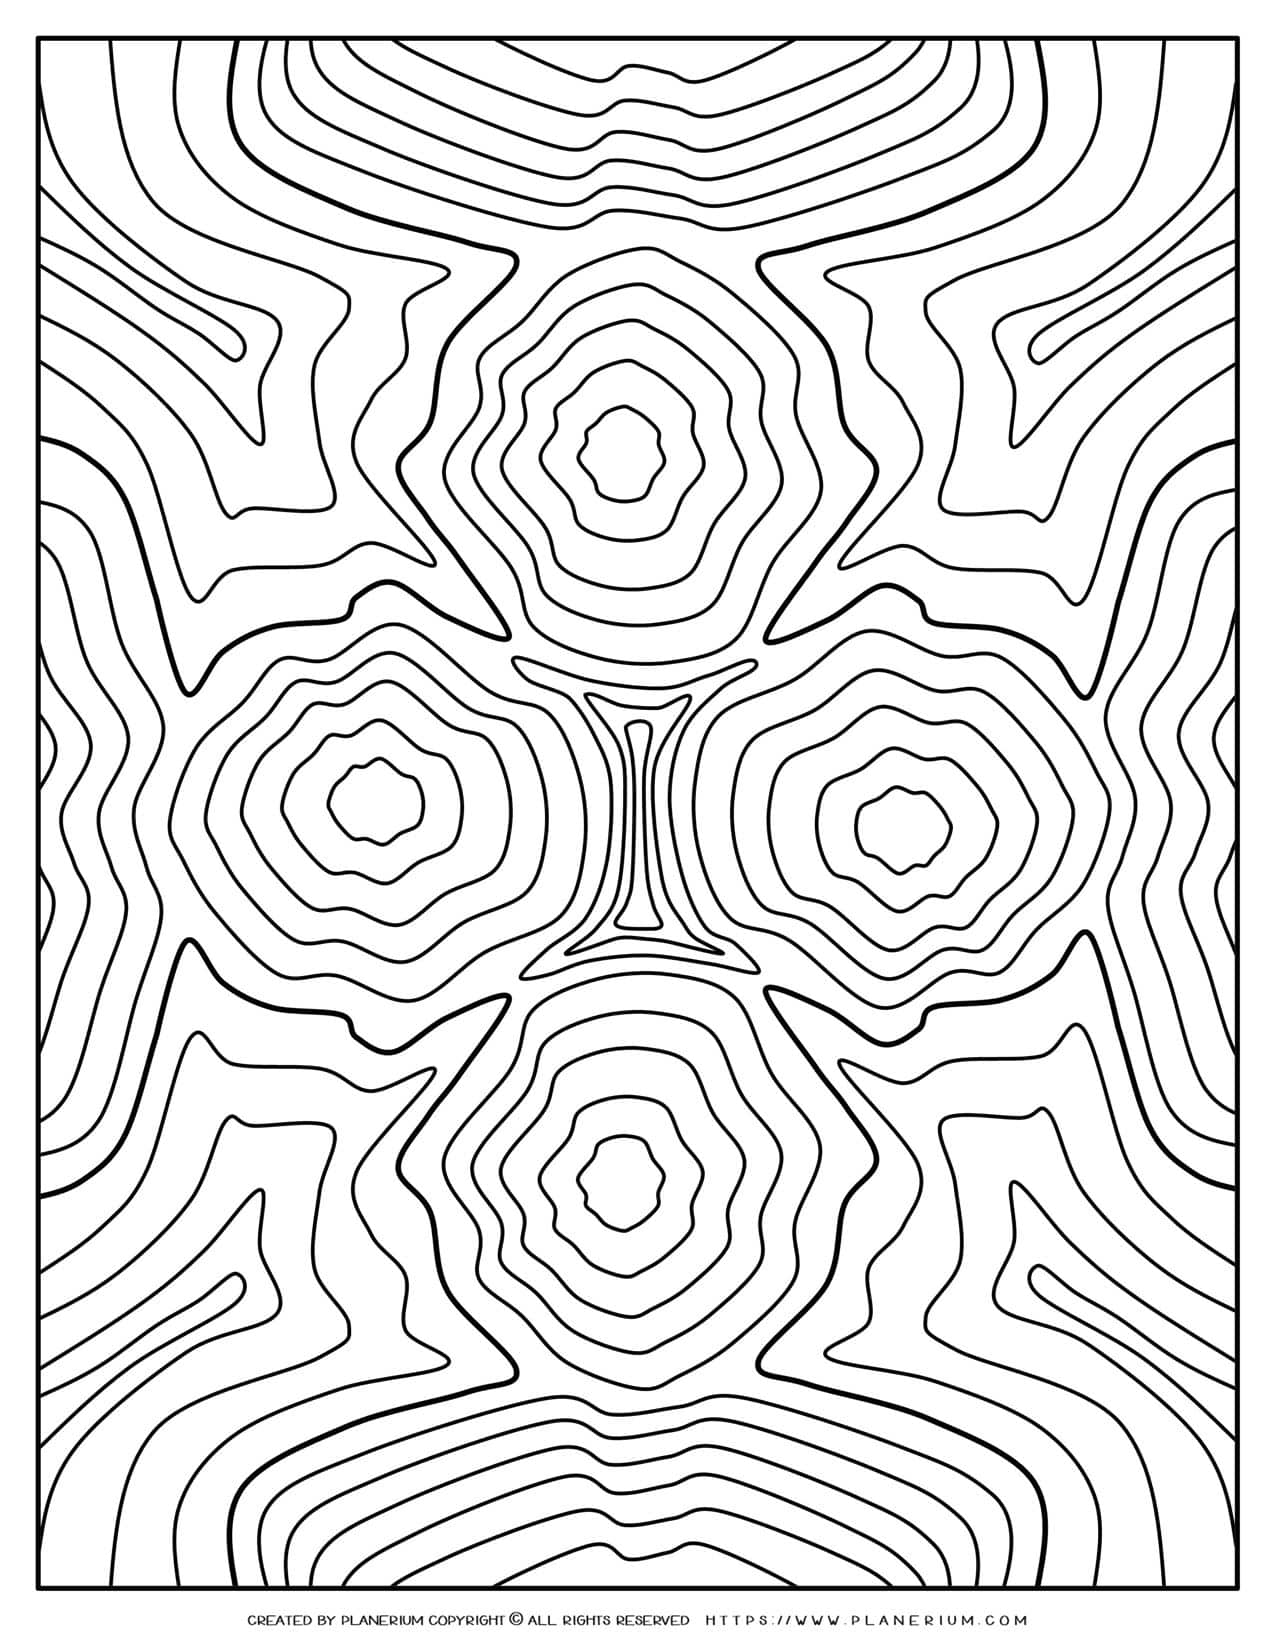 Adult Coloring Pages - Ripples of Four Figures | Planerium